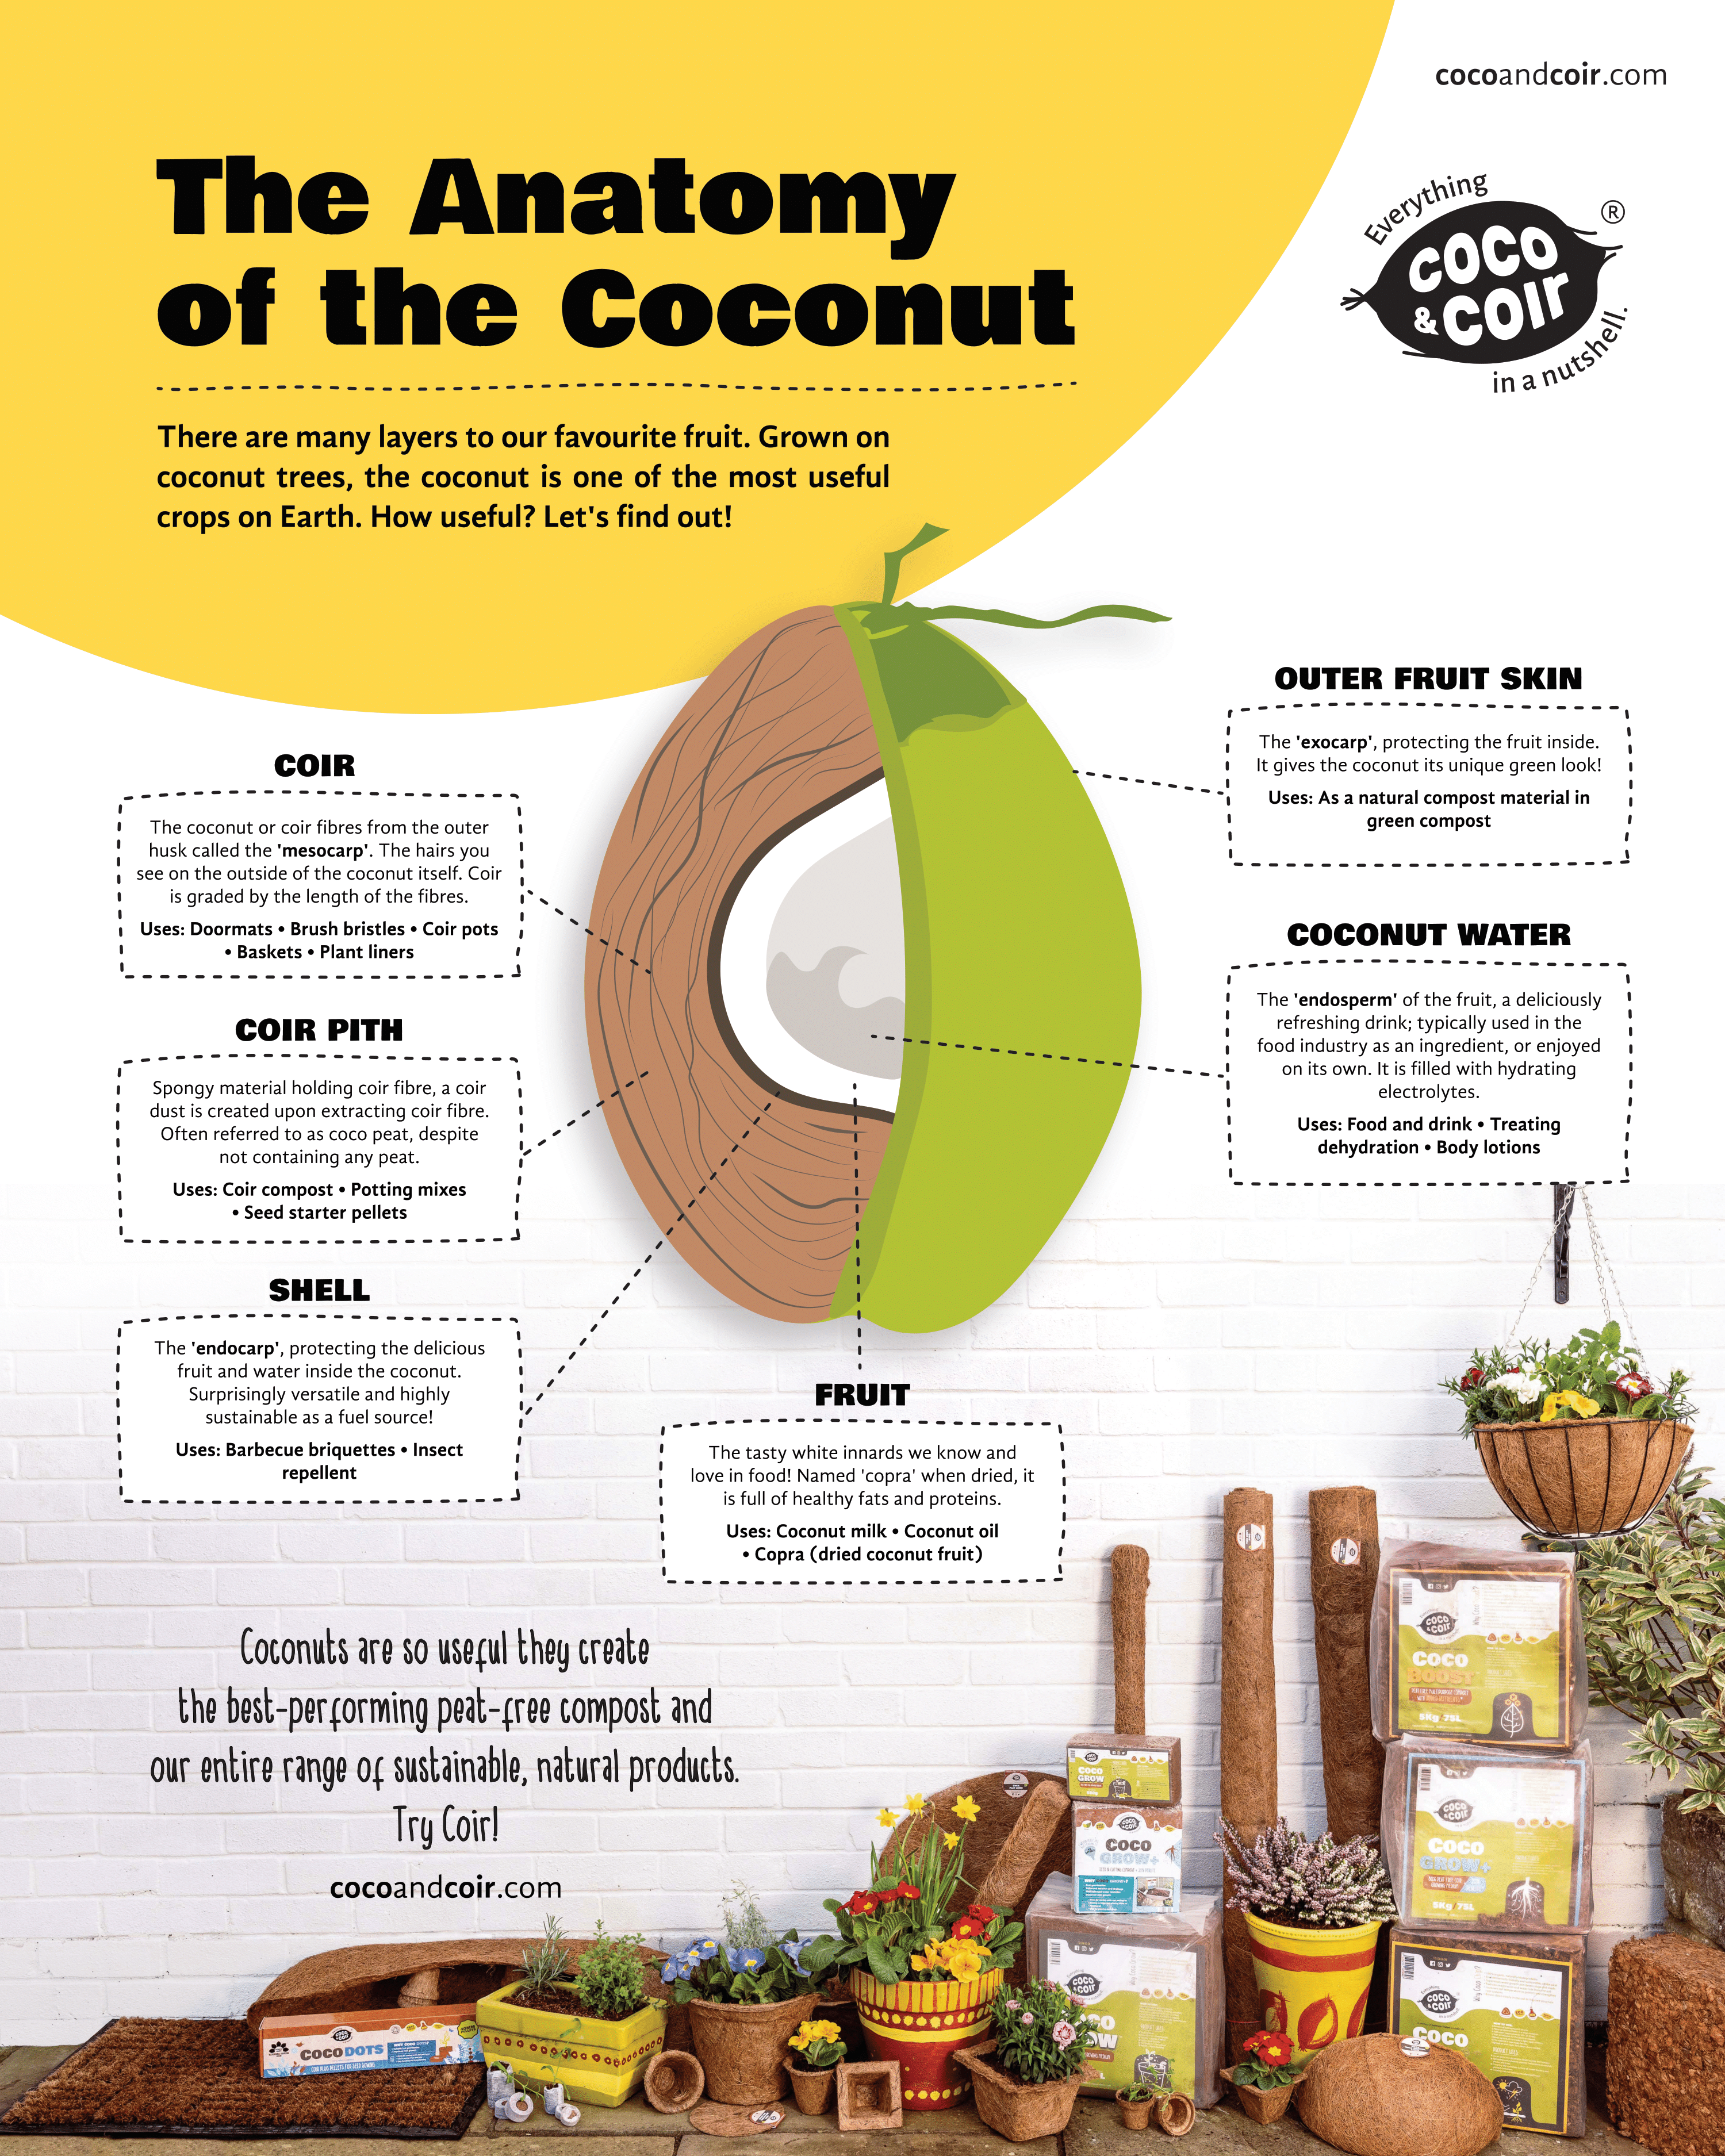 Infographic sharing the anatomy of the coconut in detail.